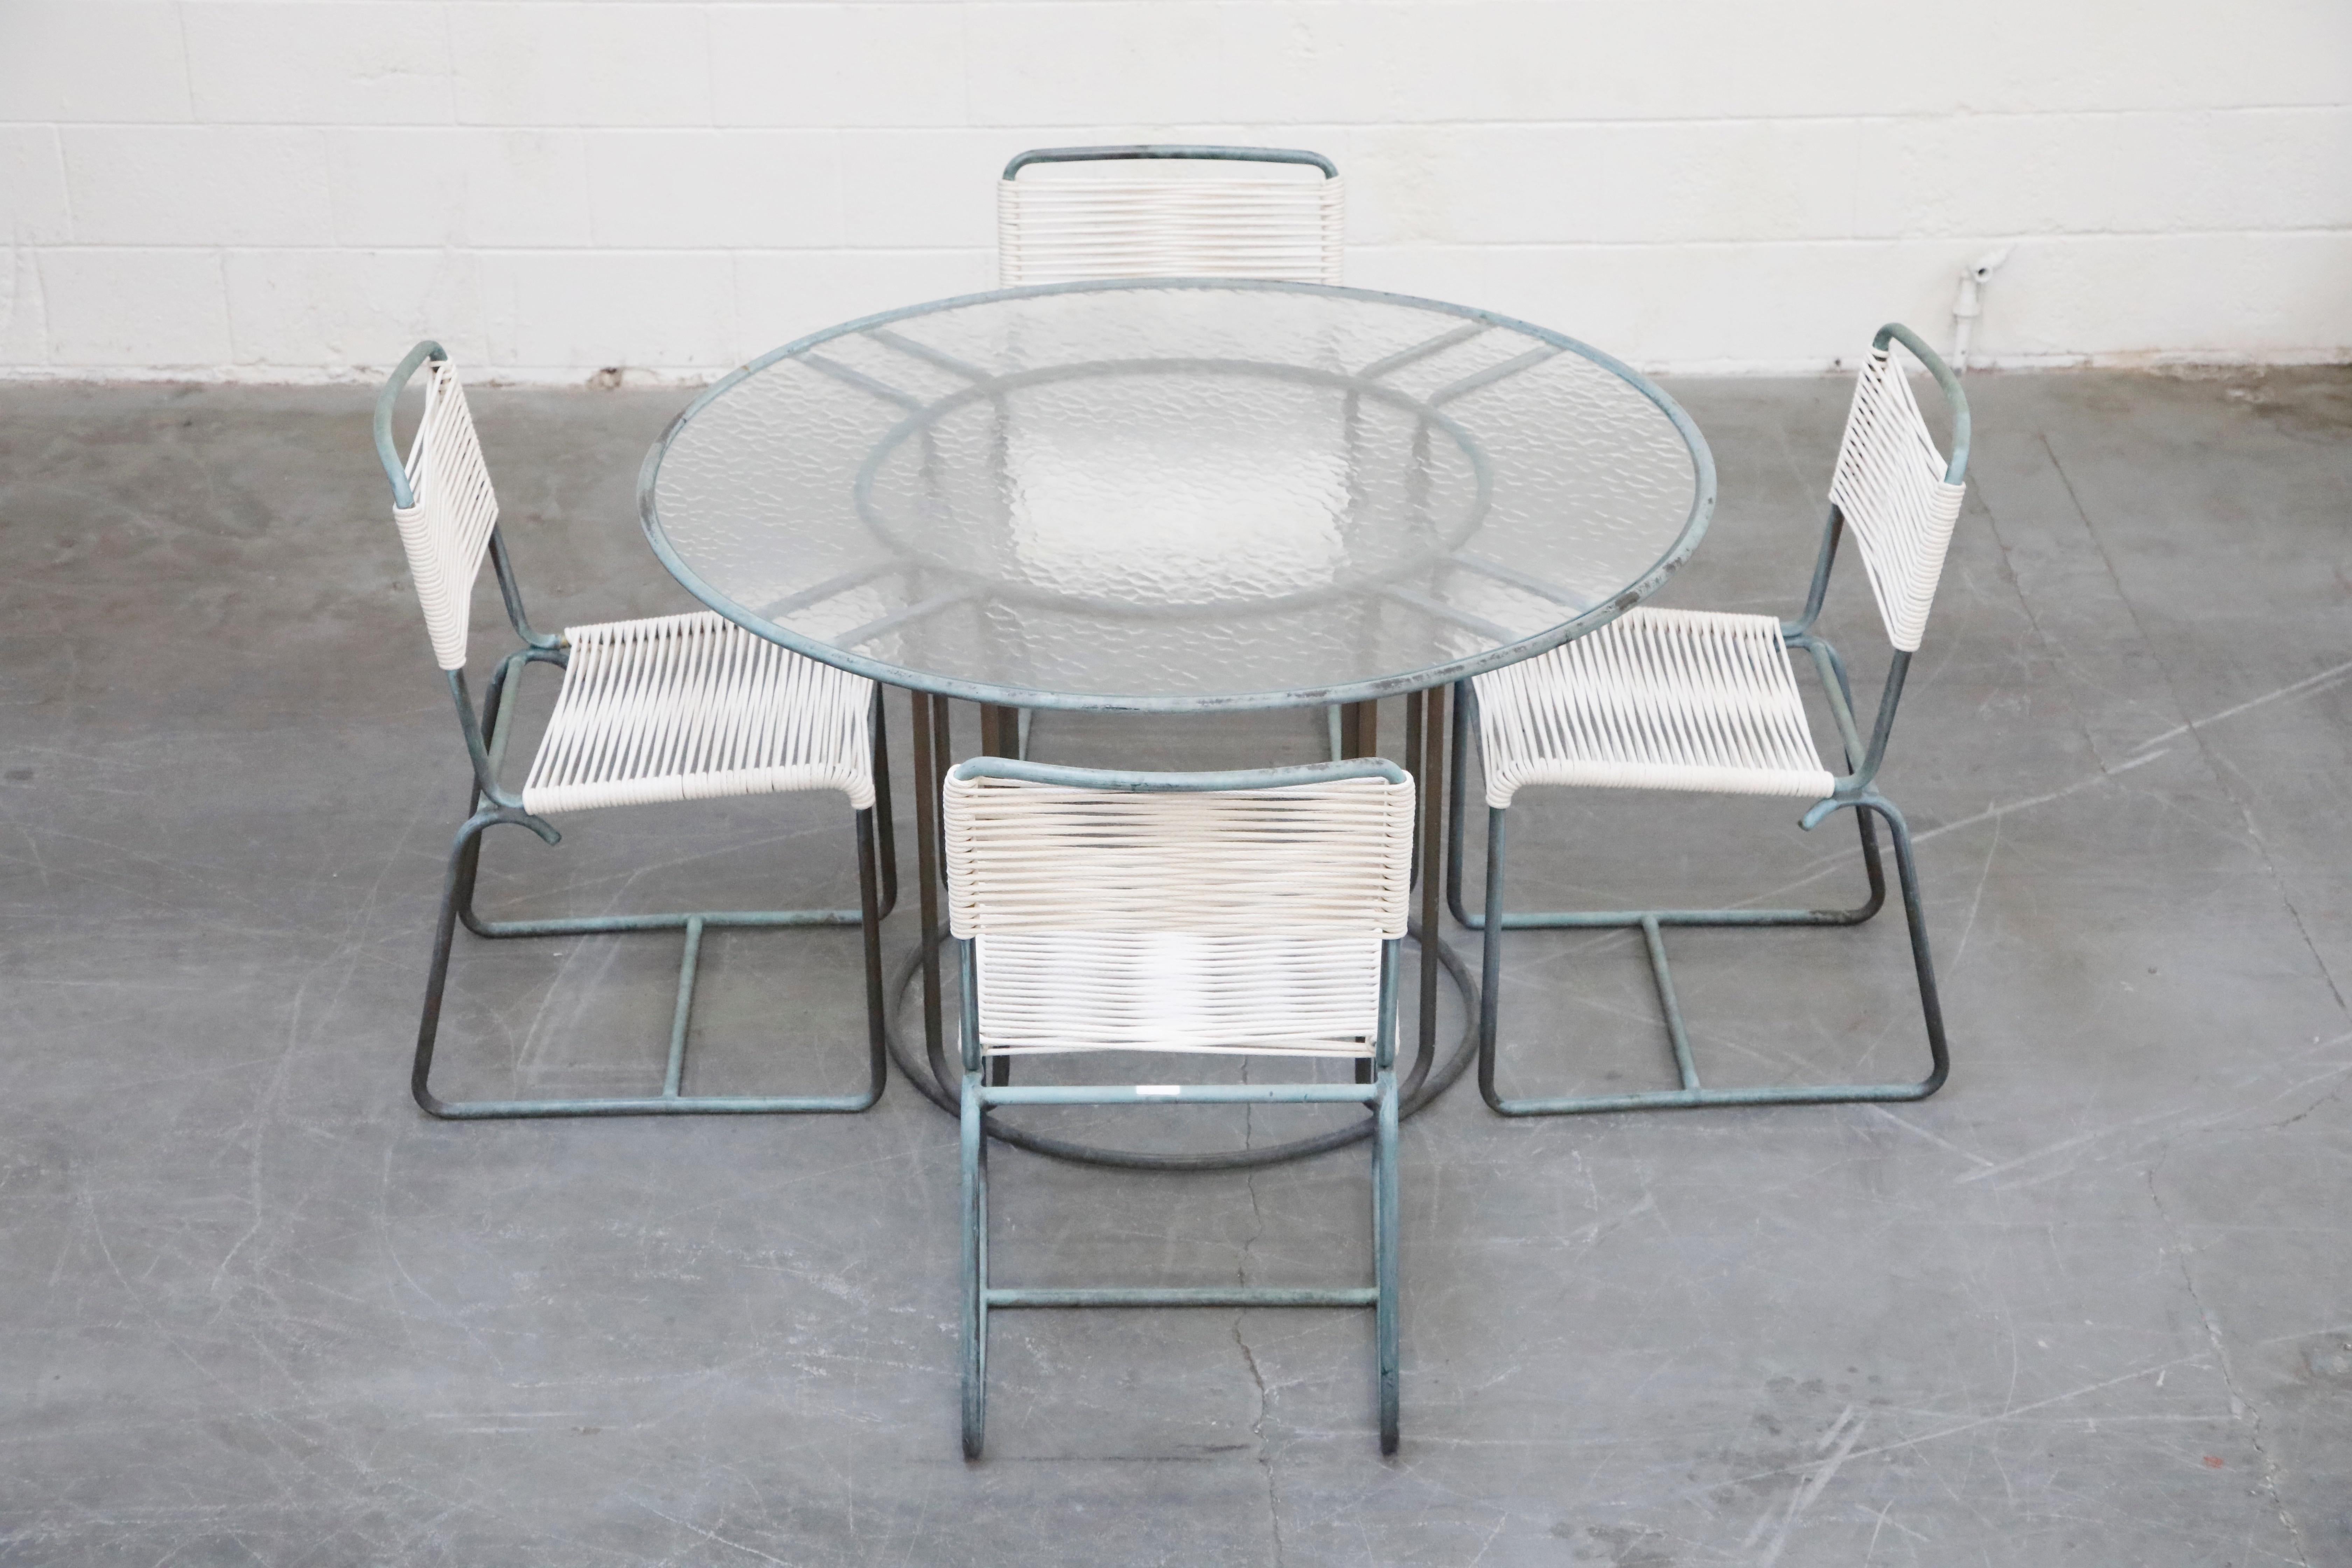 This highly-sought-after and collectible dining set comprised of four bronze dining chairs and a 48.5